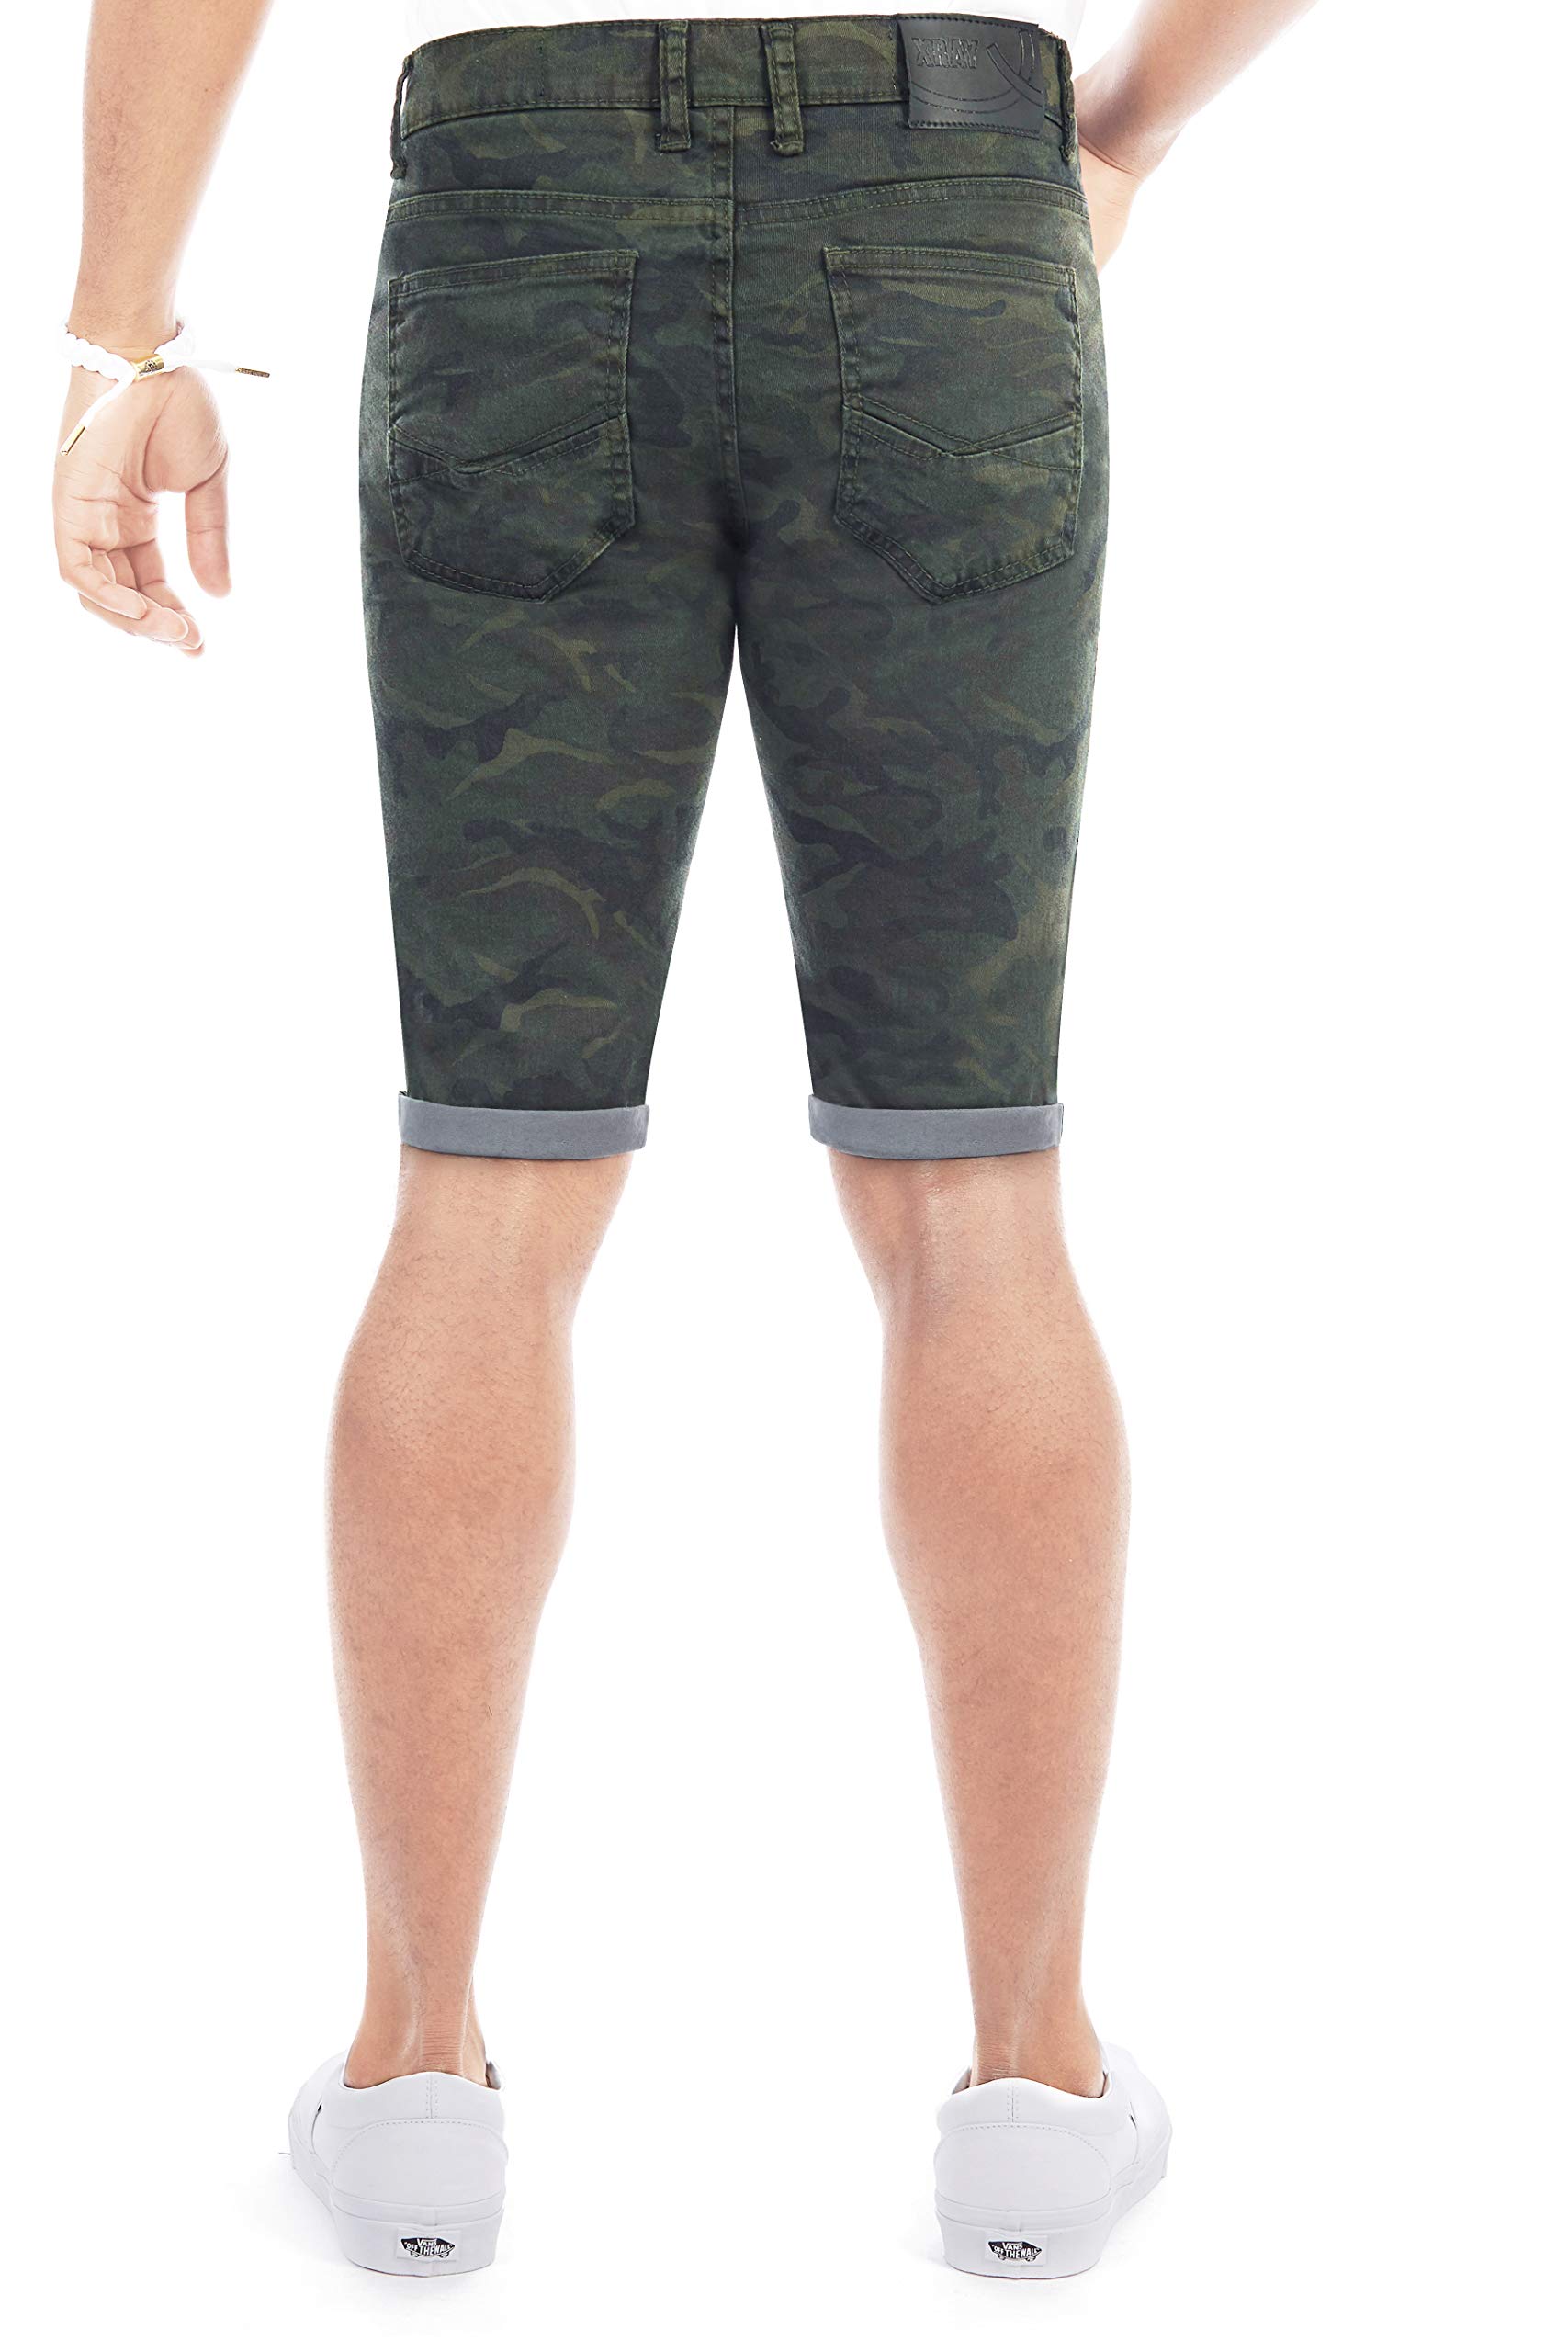 X RAY Men's Rolled Up Denim Shorts, Stretch Slim Skinny Fit, Distressed, Ripped, Bermuda Jeans Short, Olive Camo, Size 38 - image 2 of 6